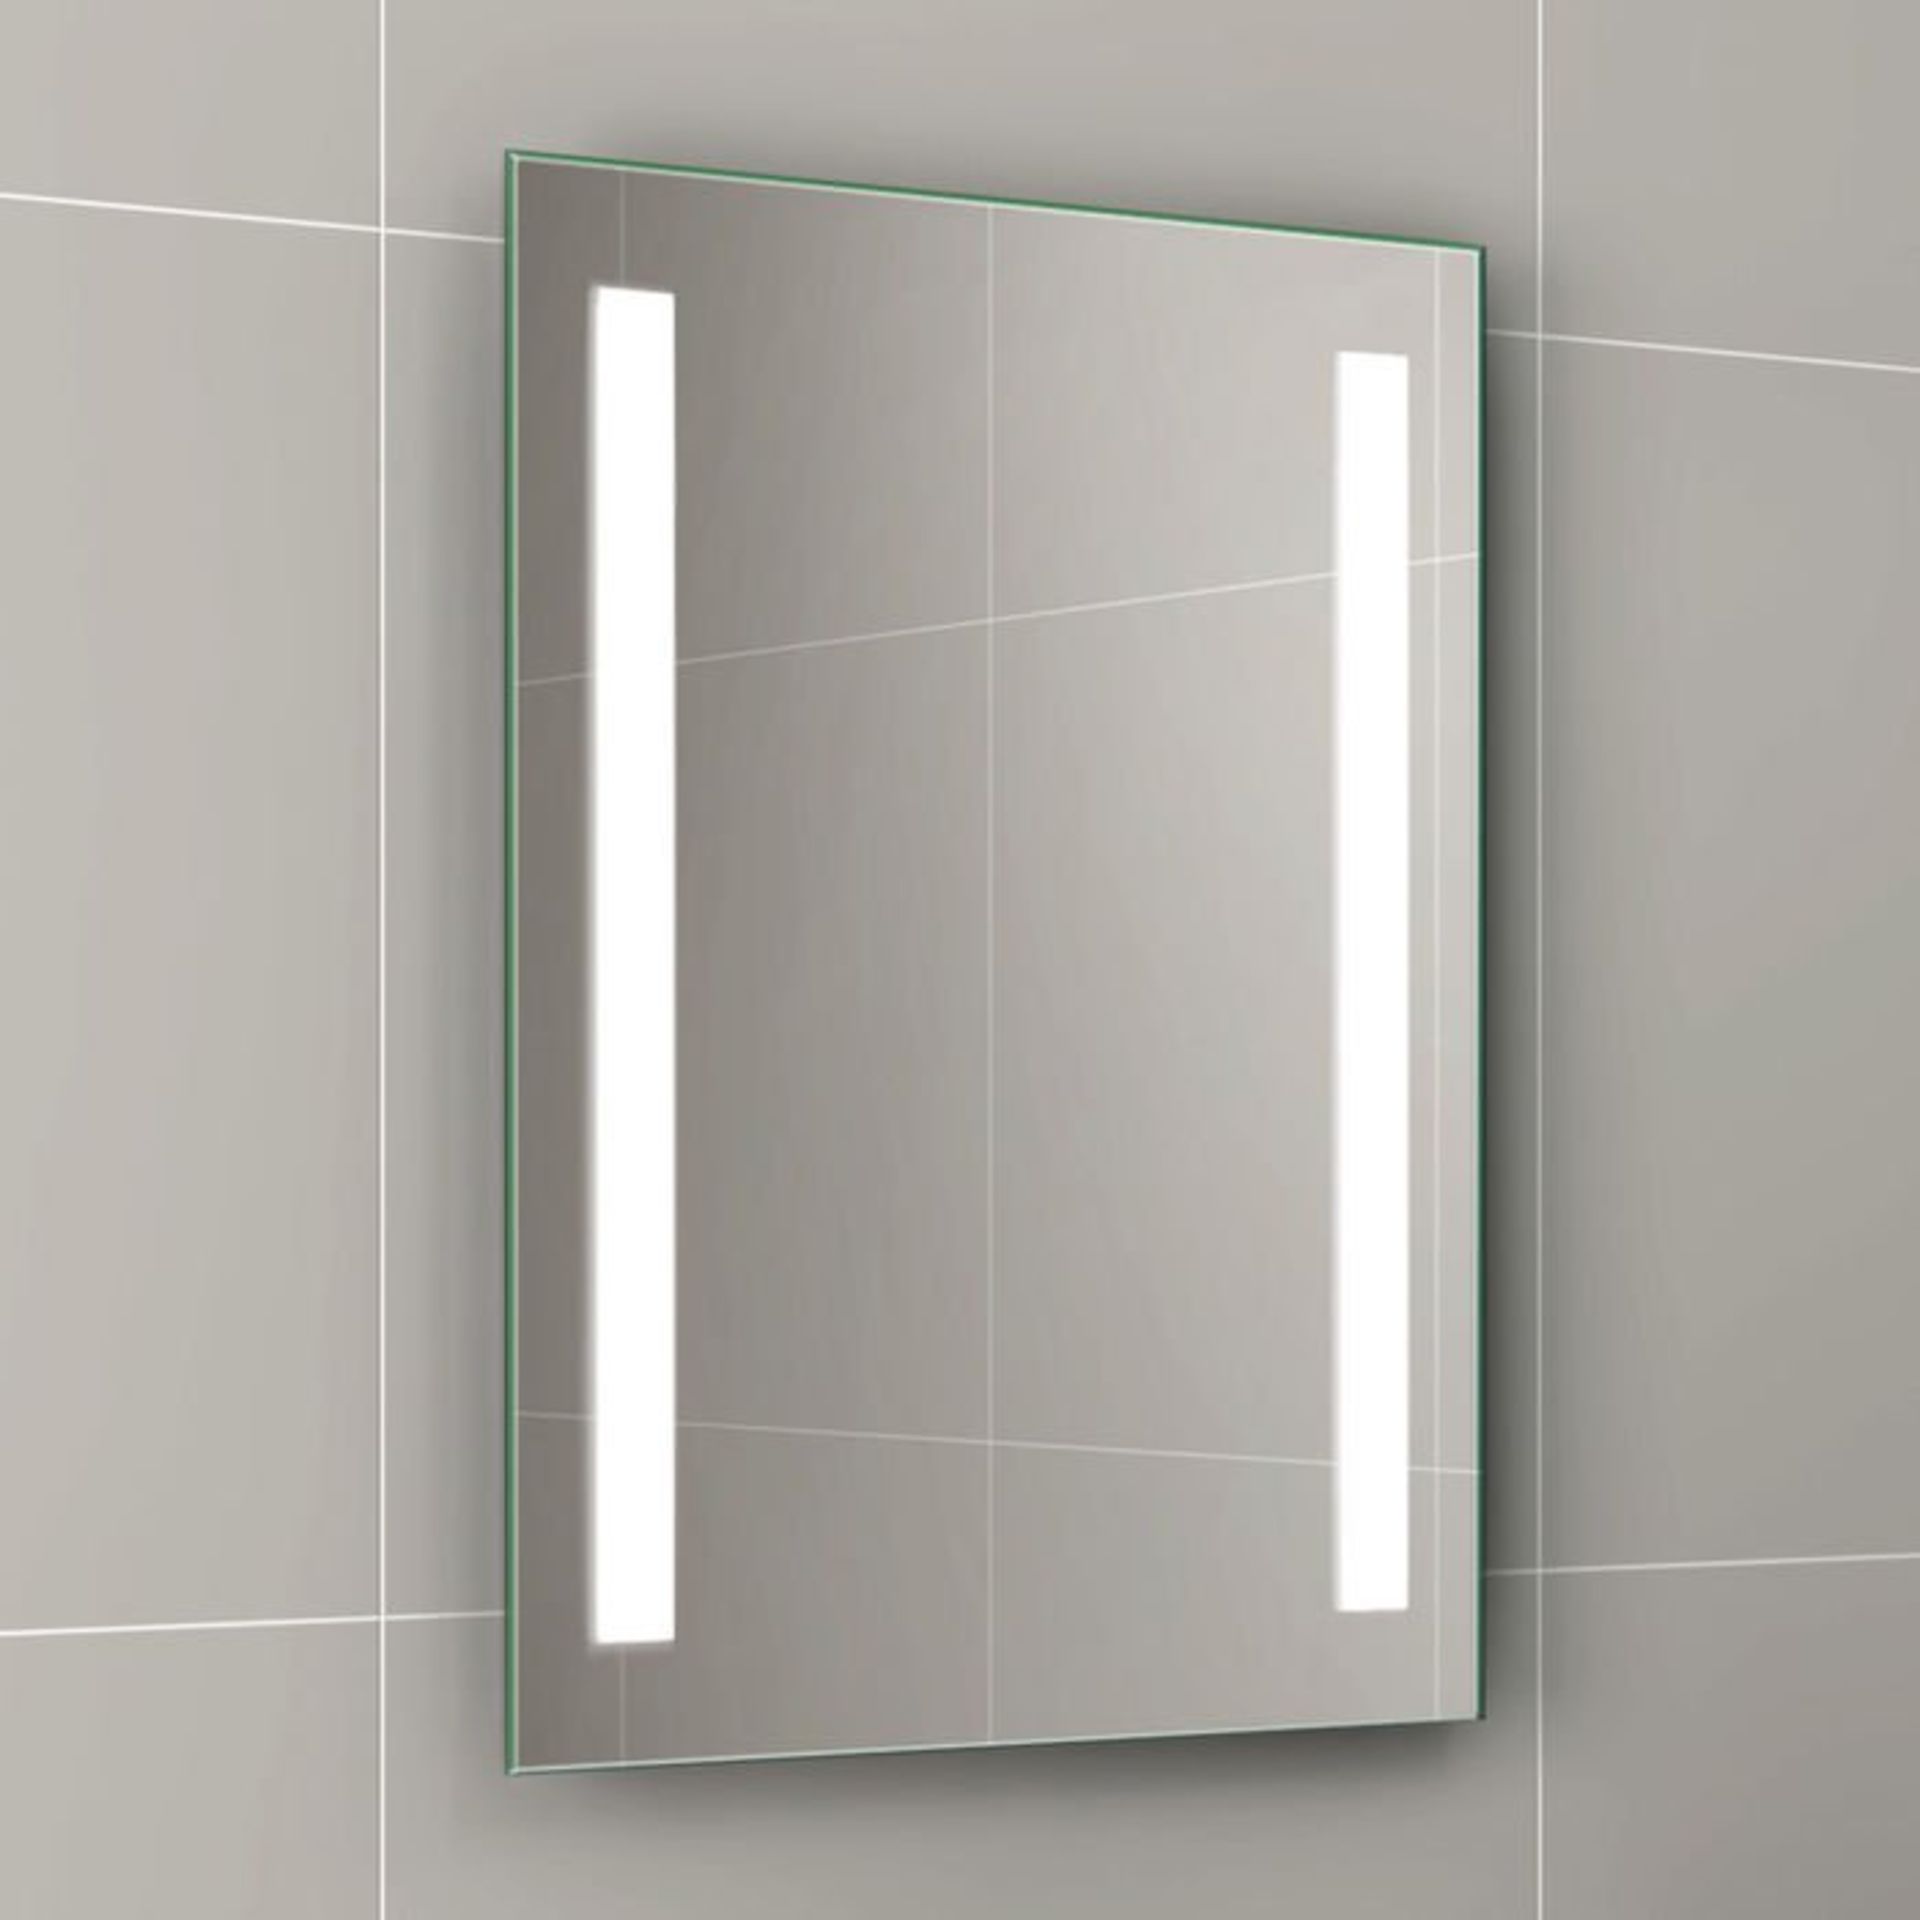 (V29) 500x700mm Omega LED Mirror - Battery Operated. Energy saving controlled On / Off switch - Image 2 of 3